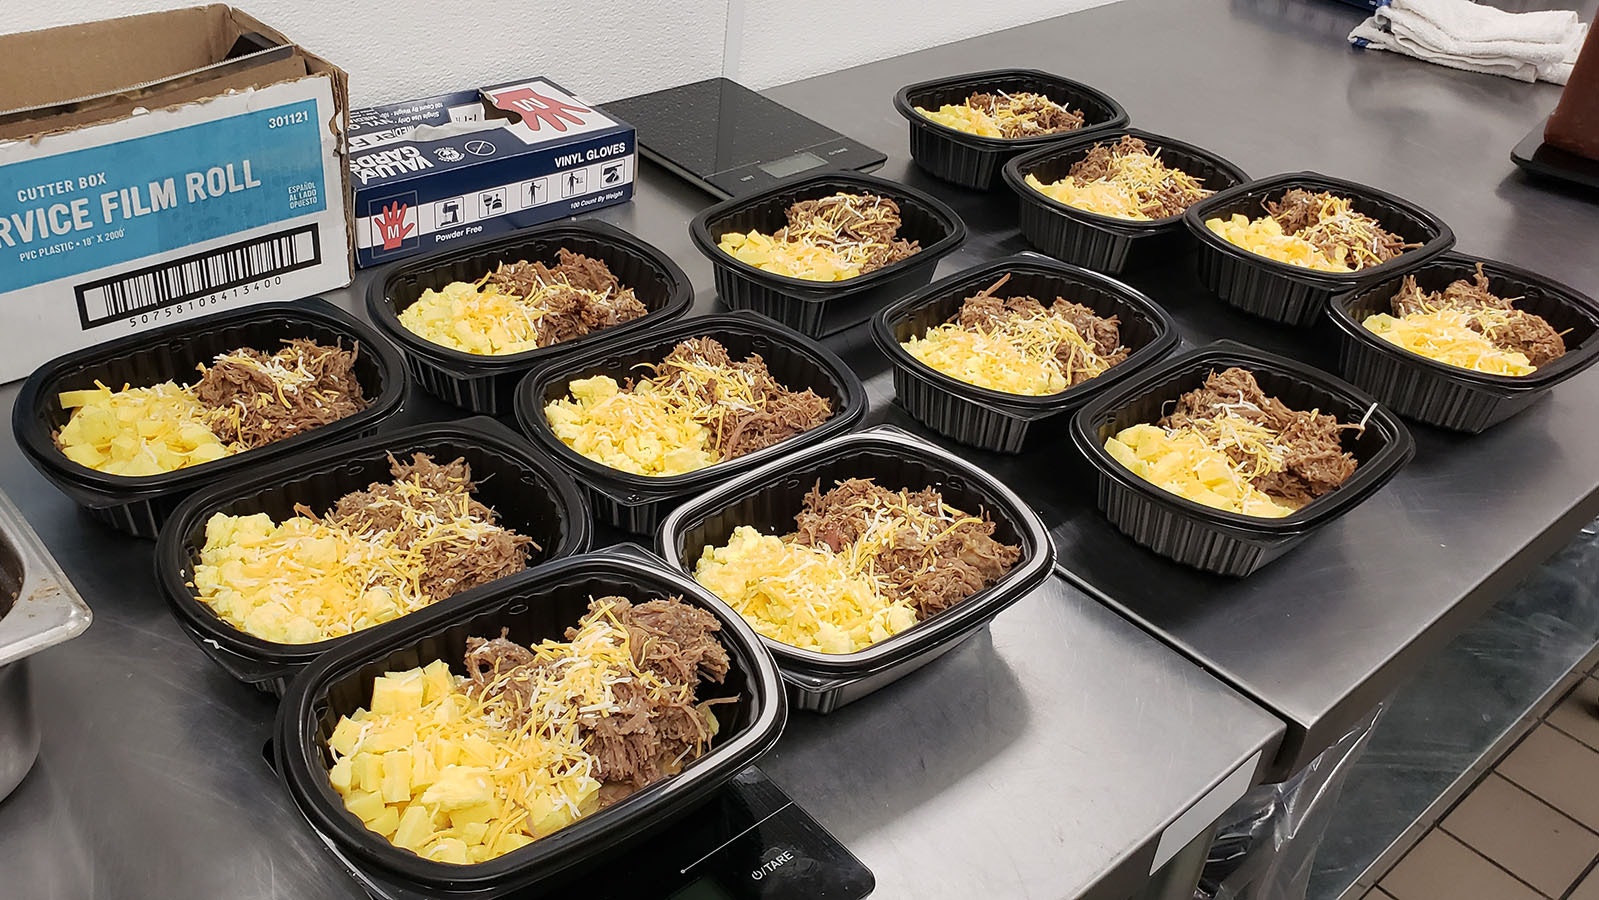 Breakfast is steak and eggs with hash browns. For the carb-conscious, hash browns can be removed.